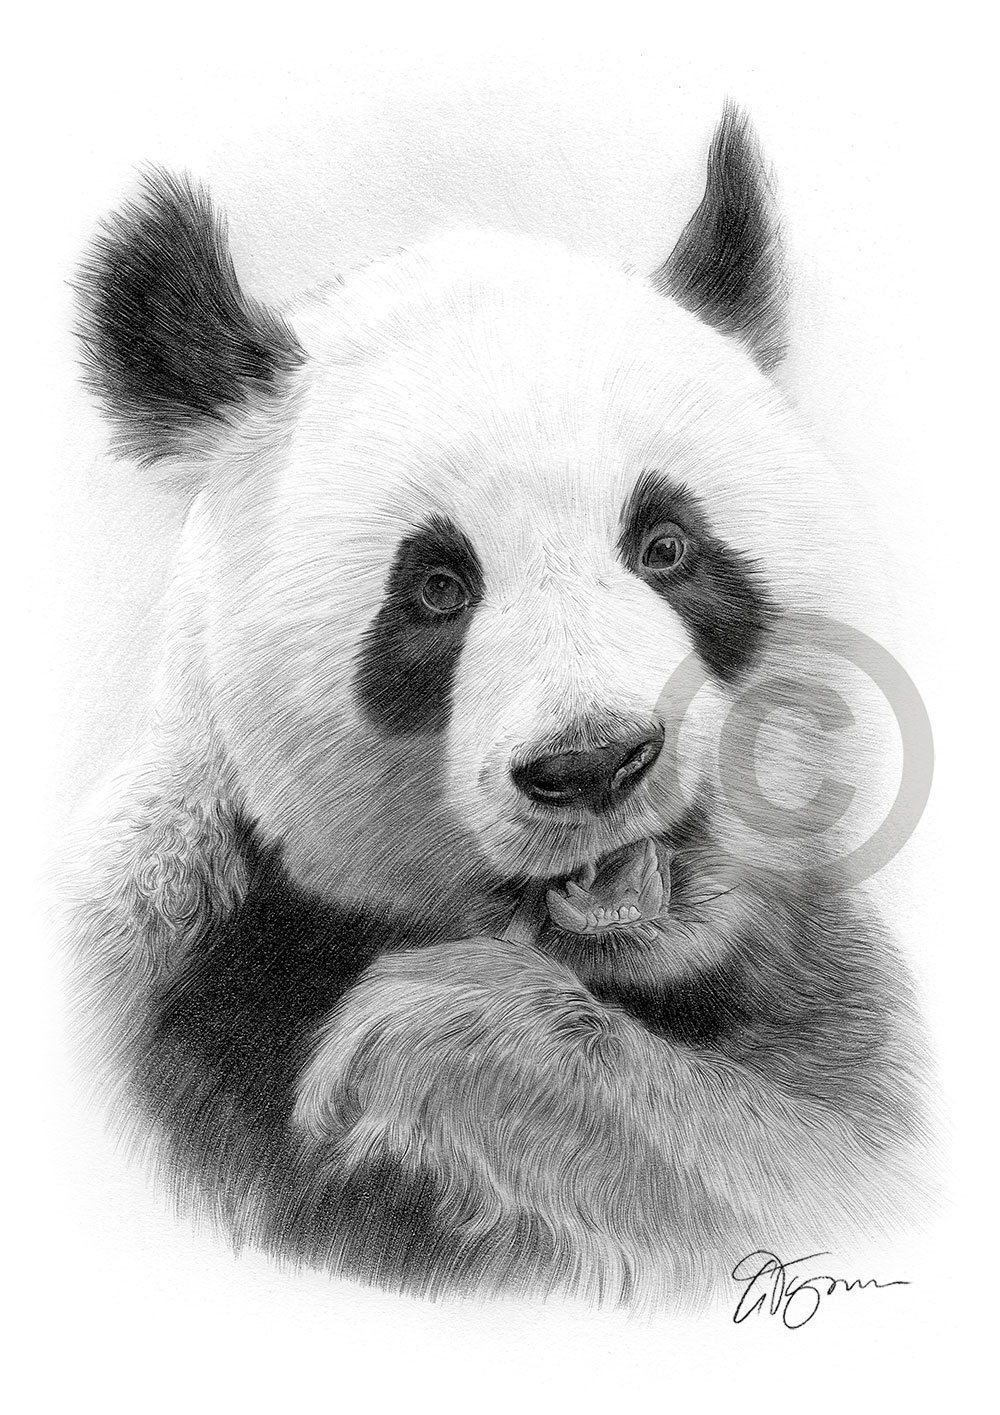 Pencil drawing of an adult giant panda by artist Gary Tymon